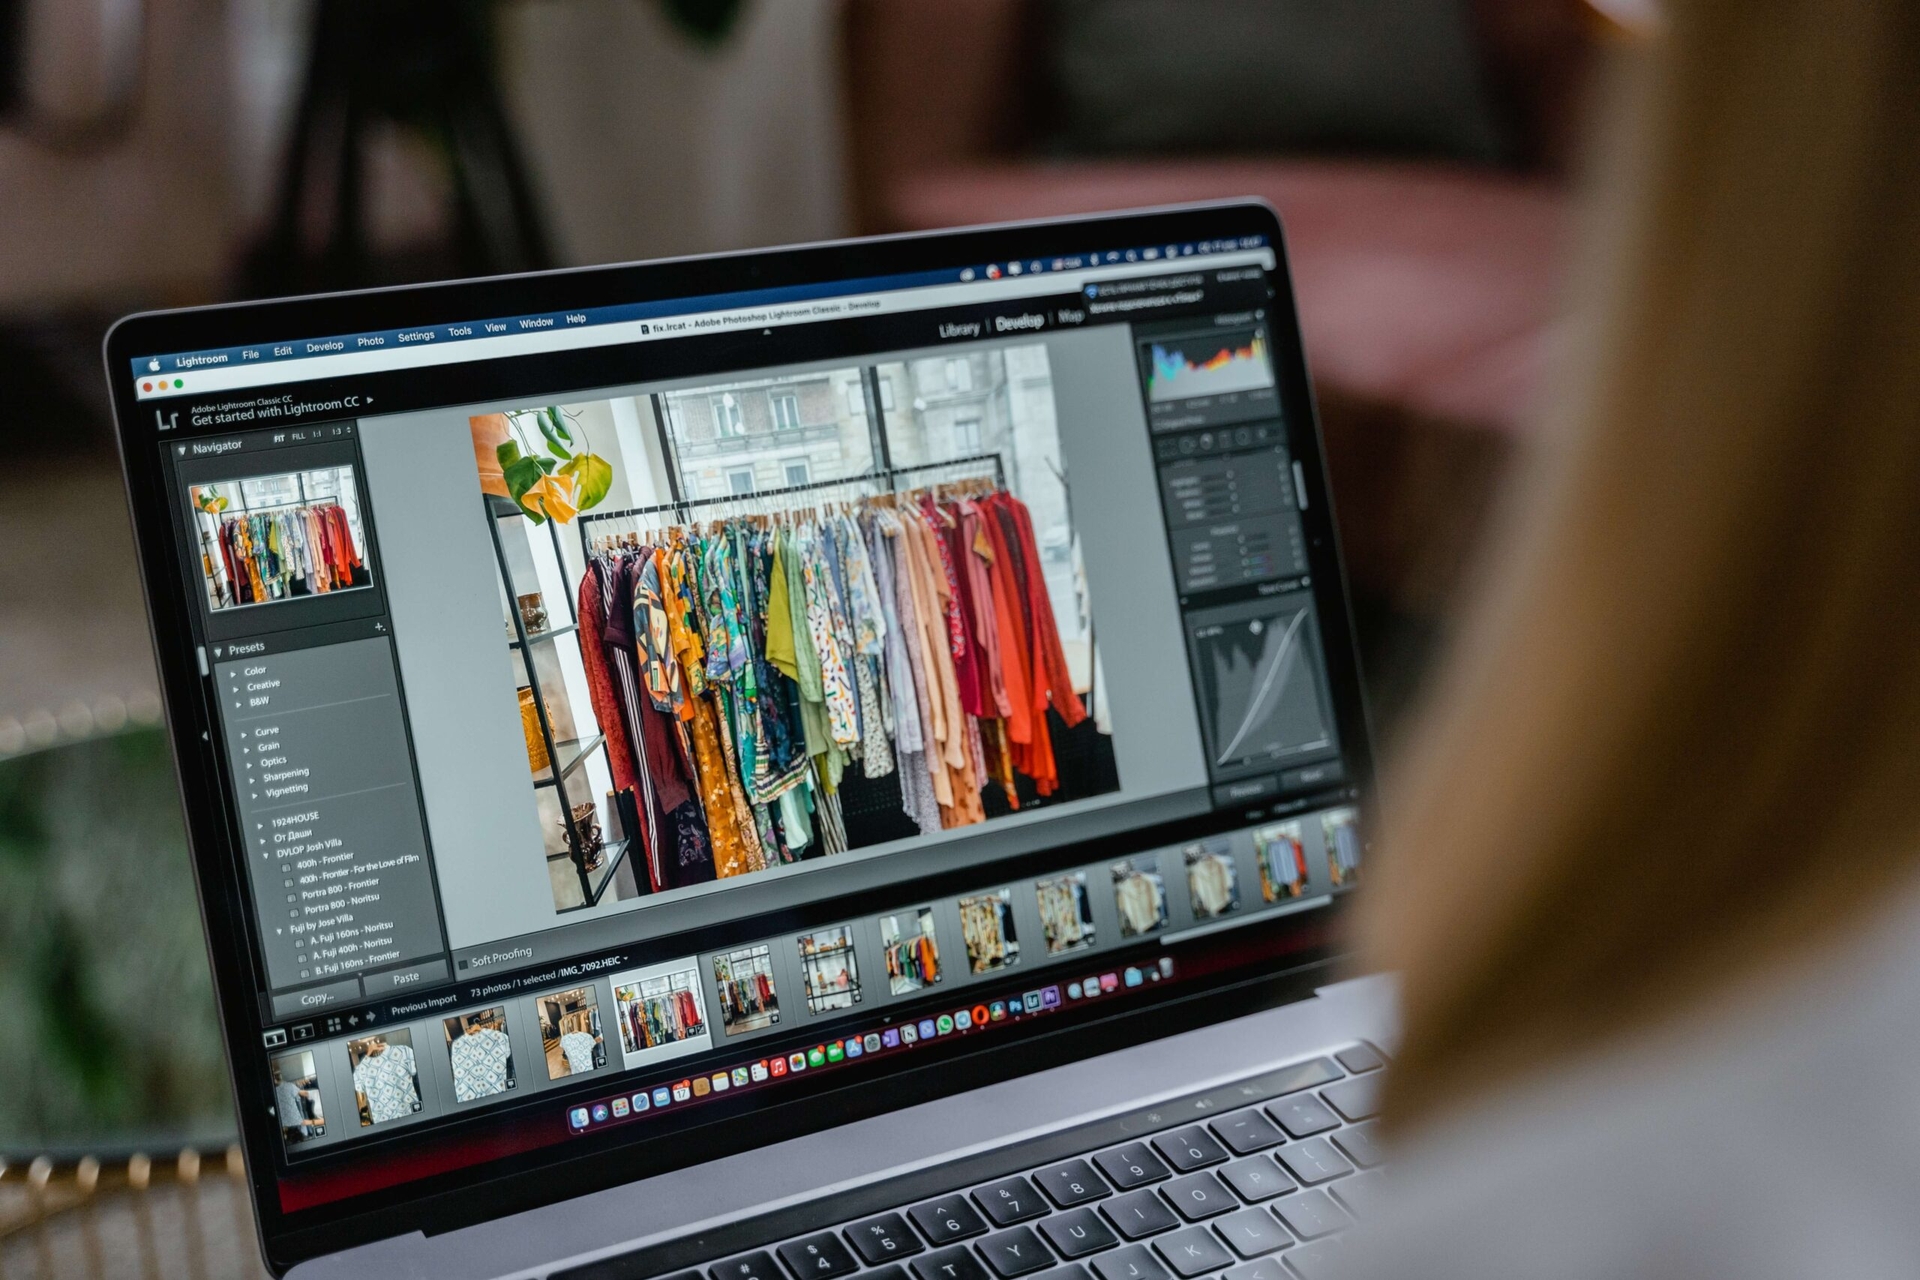 How to Make Adobe Lightroom Run Faster in 6 Ways